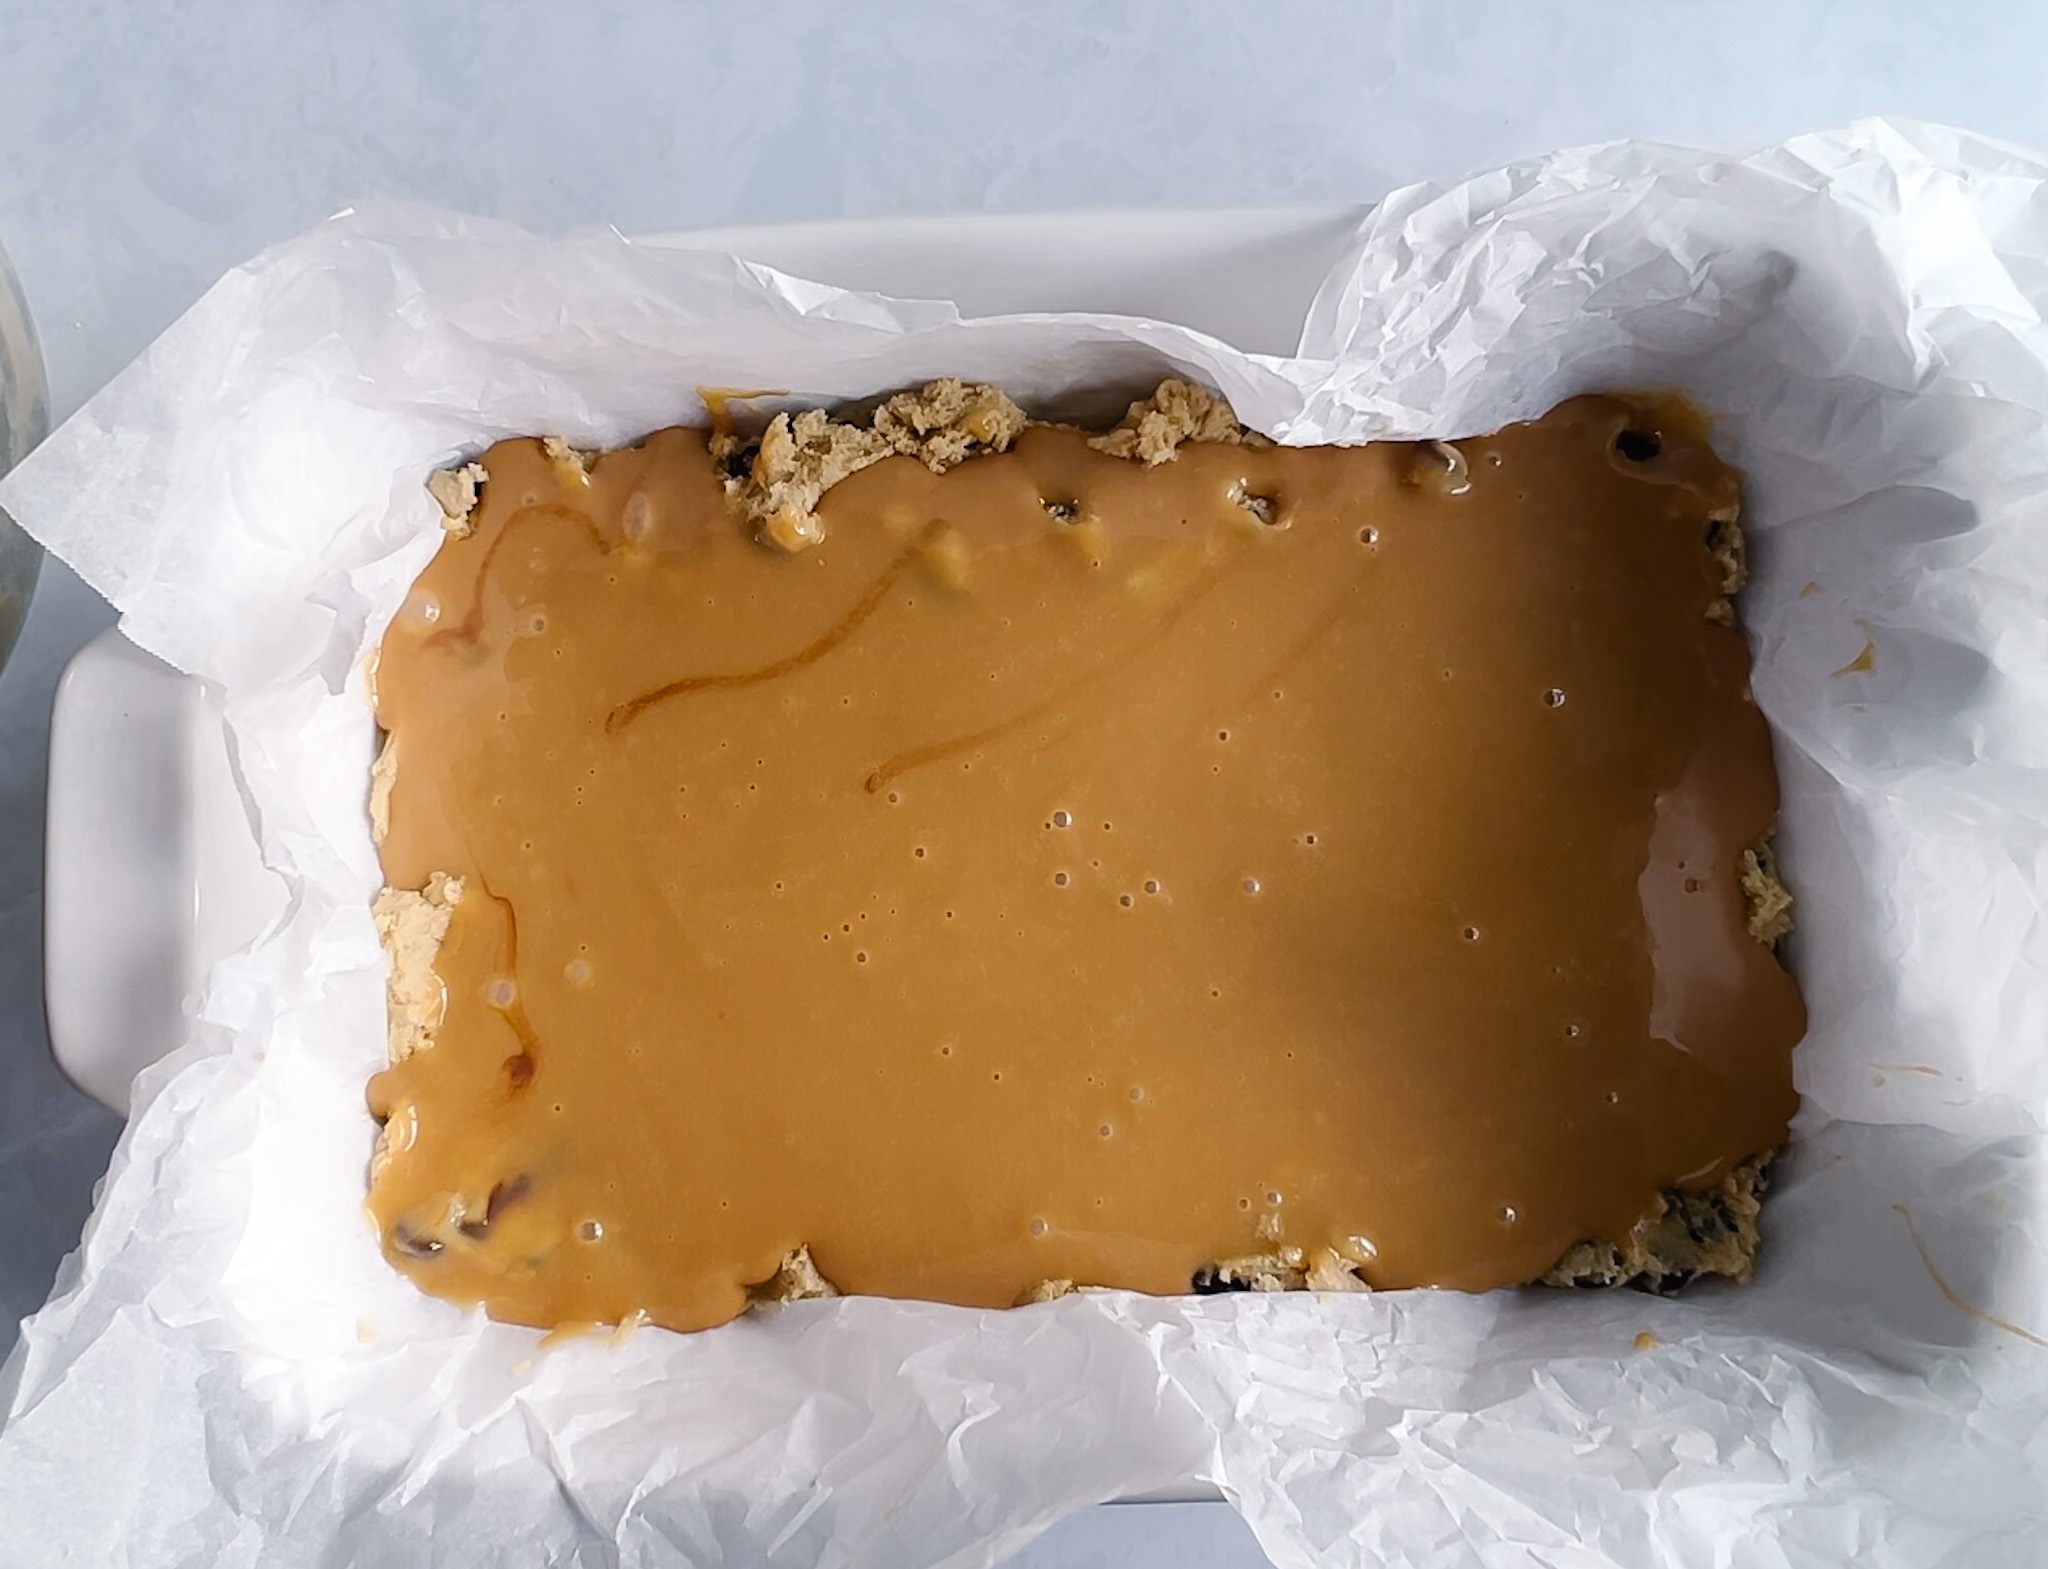 picture of how the caramel looks on top of the dough